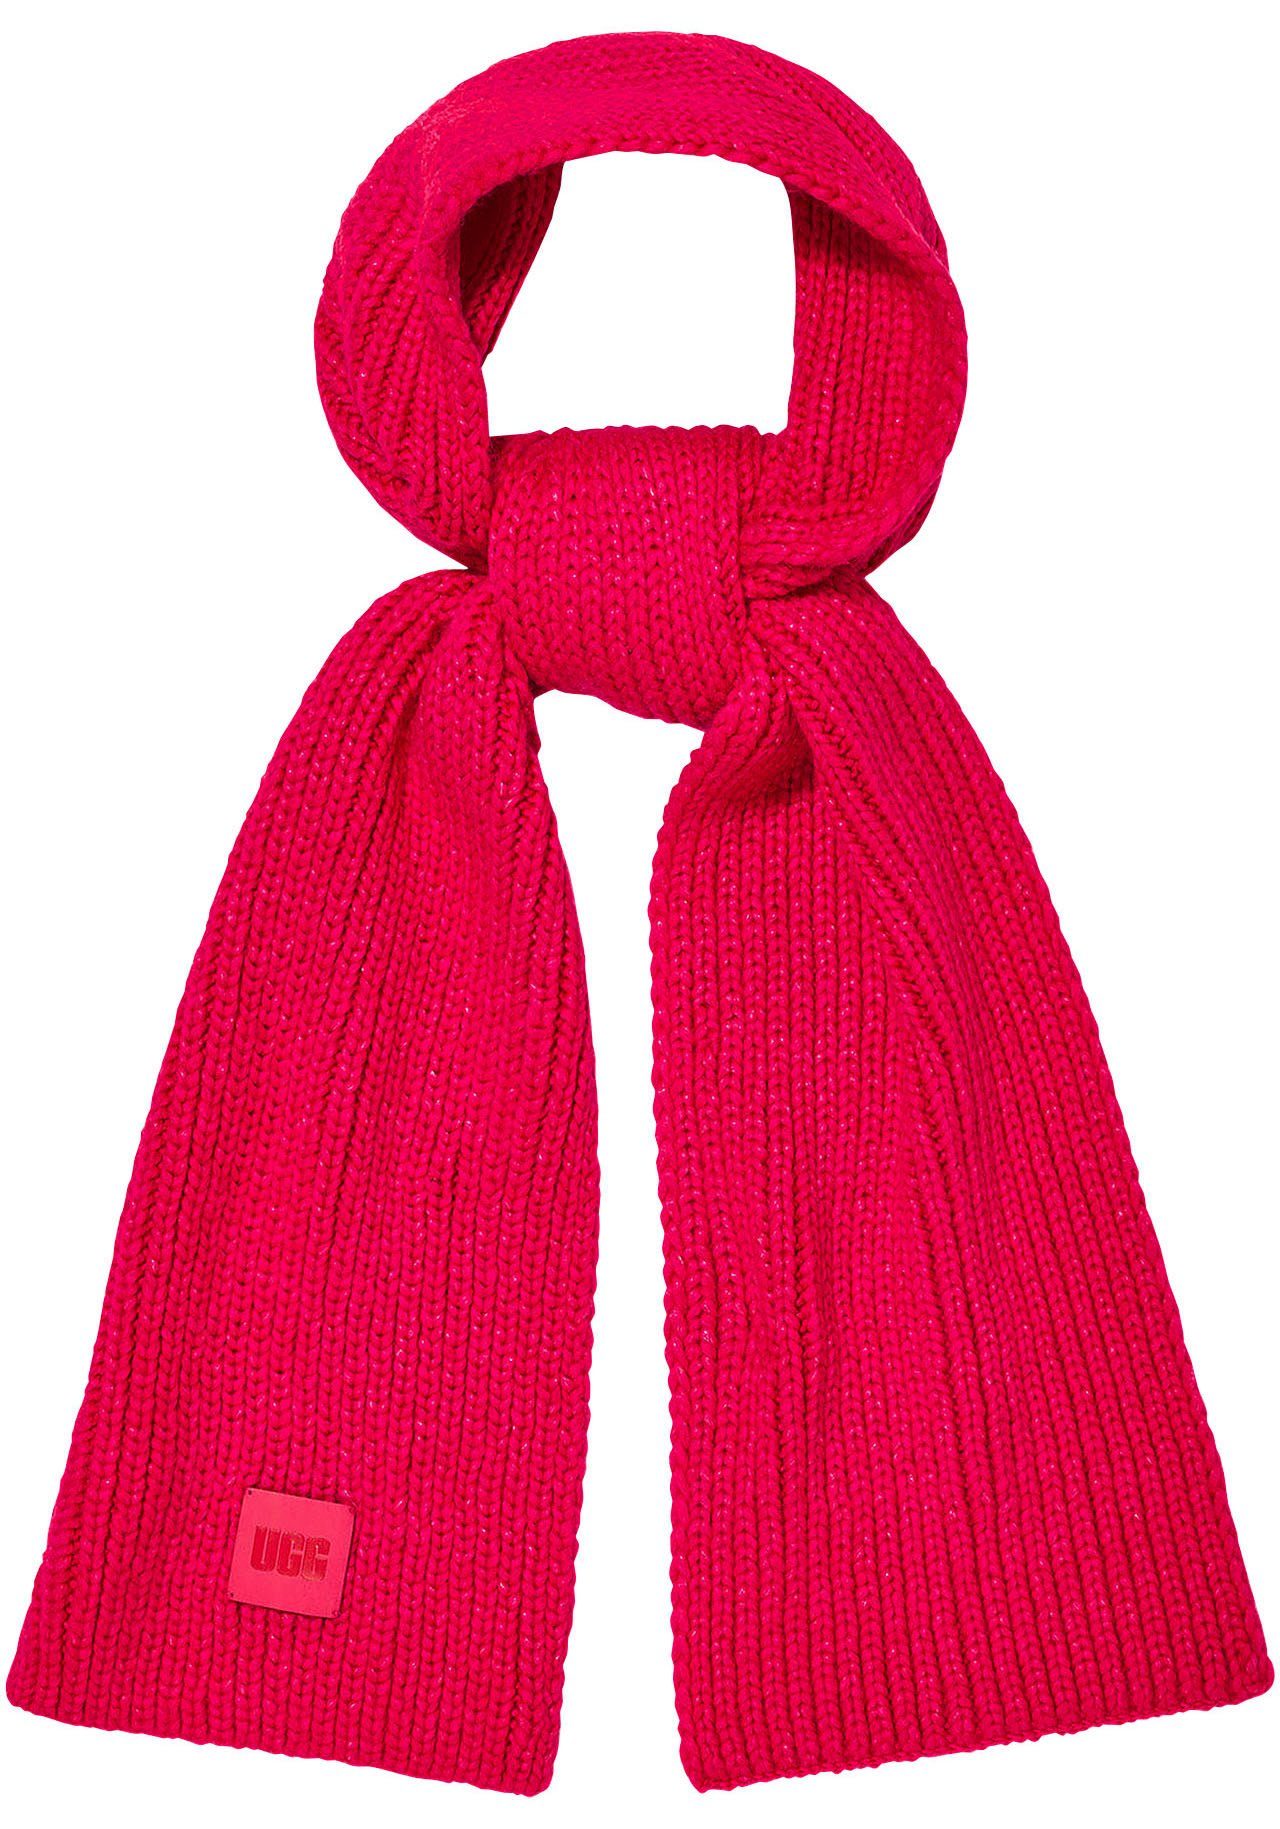 UGG Schal W CHUNKY RIB KNIT SCARF, Normale Passform